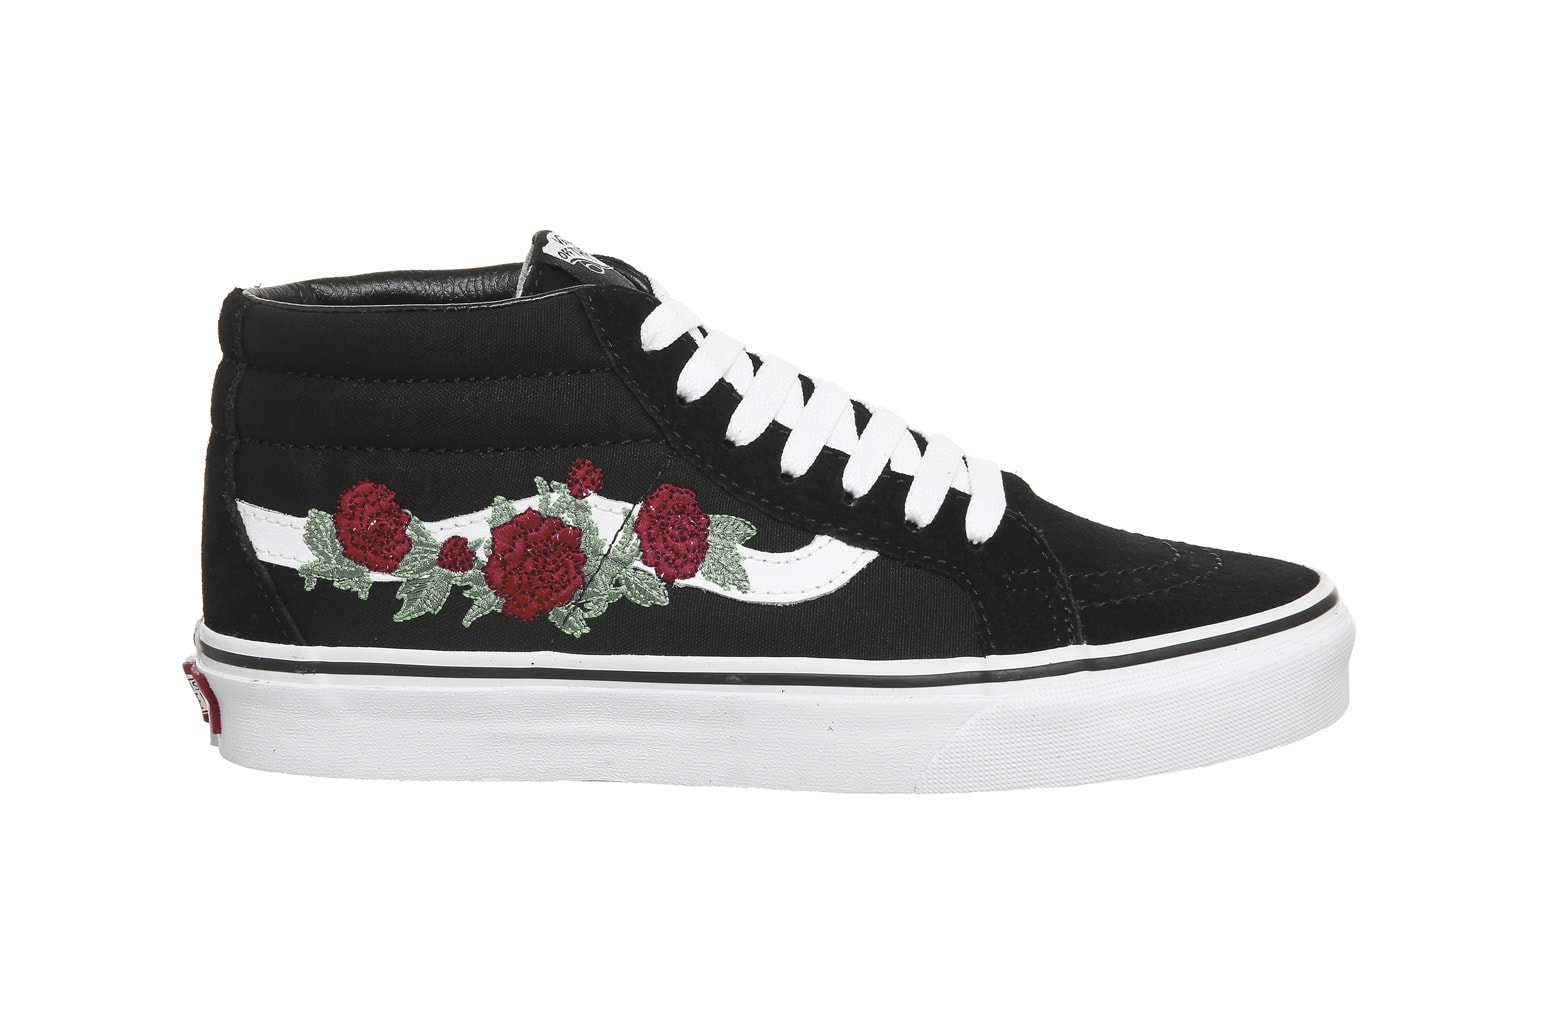 Vans sk8-mid black white rose thorns floral embroidery mens womens unisex where to buy